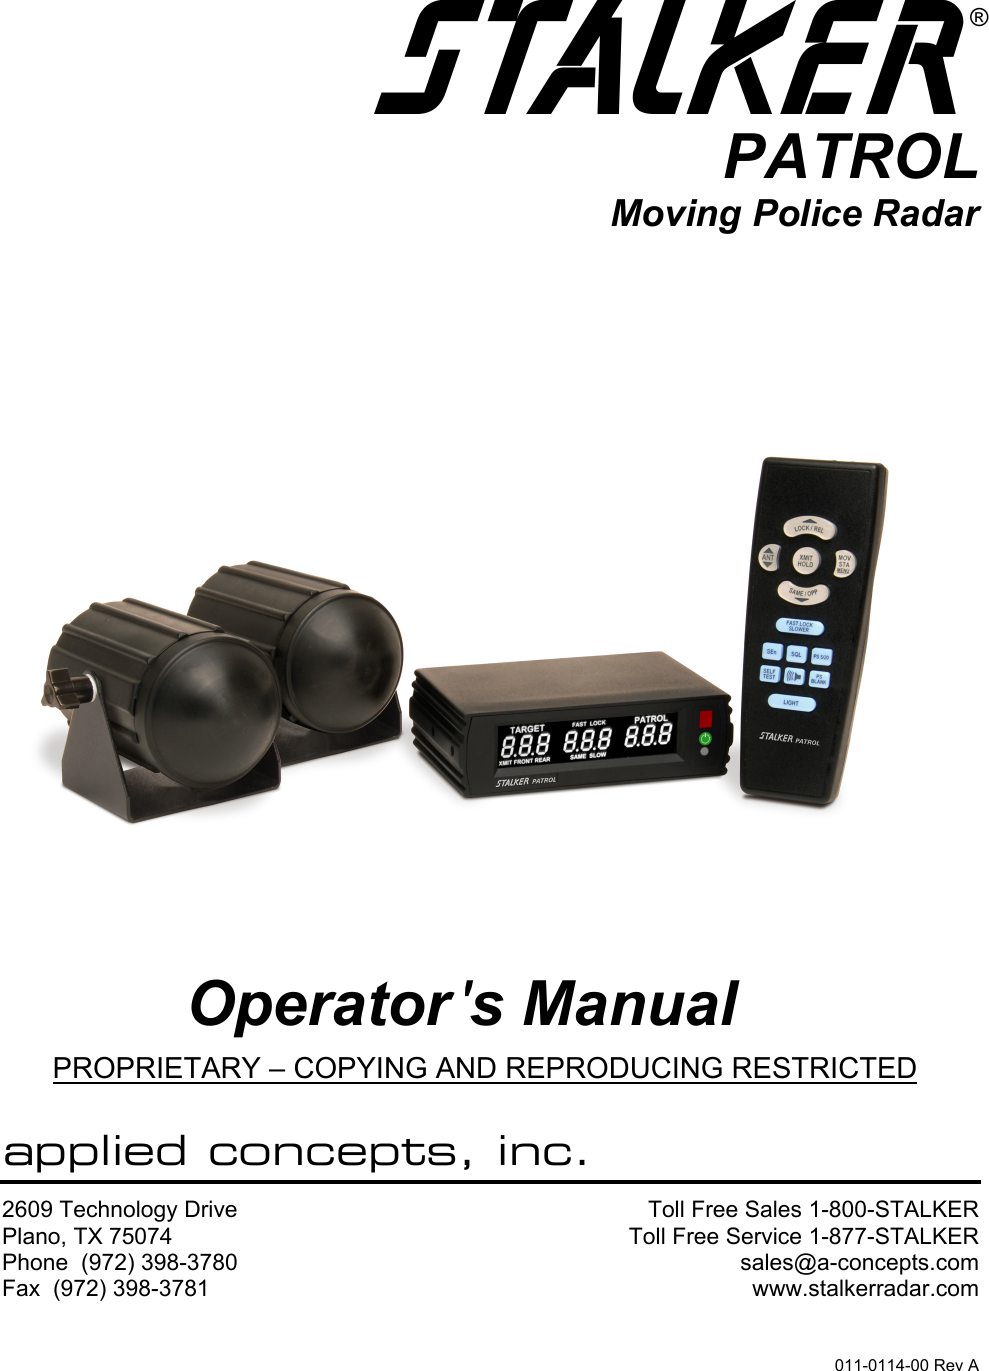  S®PATROLMoving Police Radar      Operator &apos;s Manual PROPRIETARY – COPYING AND REPRODUCING RESTRICTED  applied concepts, inc. 2609 Technology Drive Plano, TX 75074 Phone  (972) 398-3780 Fax  (972) 398-3781 Toll Free Sales 1-800-STALKERToll Free Service 1-877-STALKERsales@a-concepts.comwww.stalkerradar.com011-0114-00 Rev A 